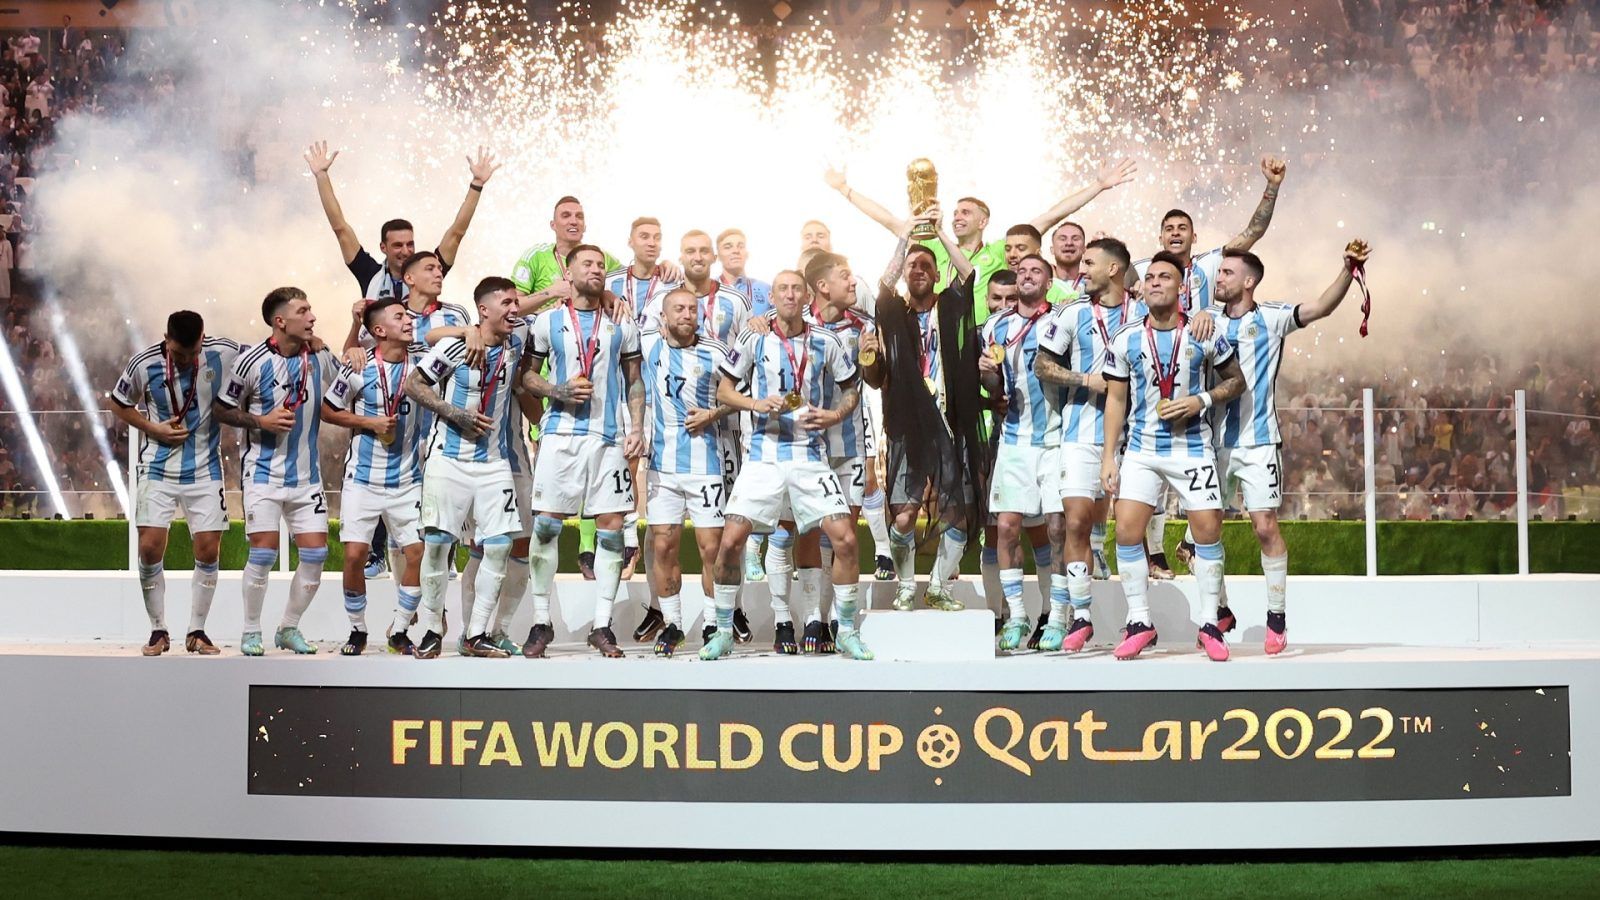 The most memorable moments from the 2022 FIFA World Cup